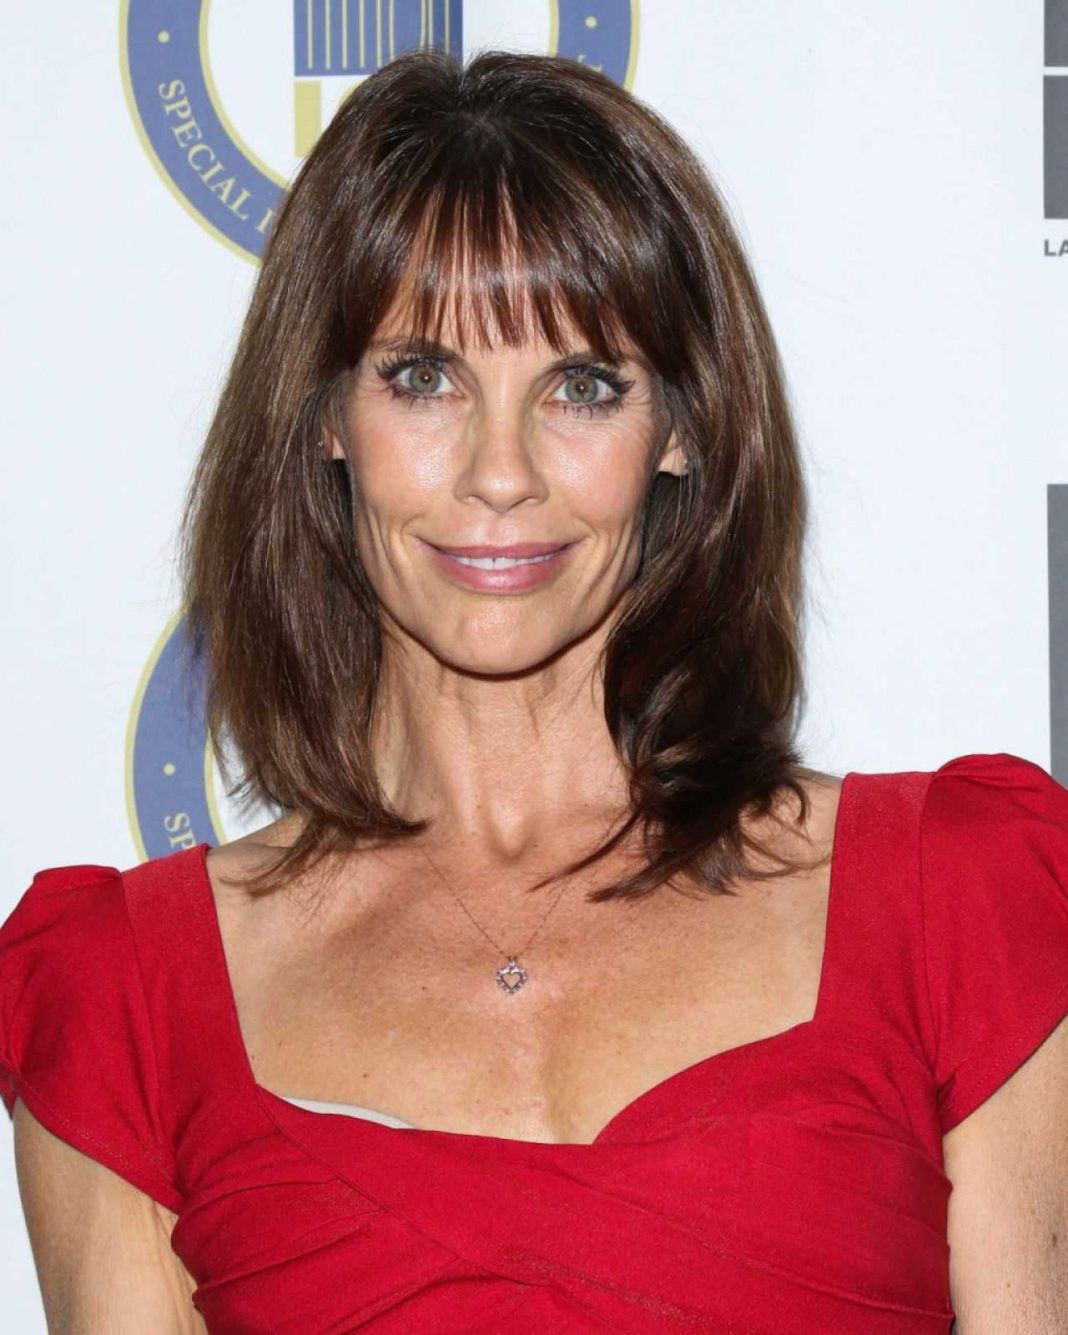 49 Alexandra Paul Nude Pictures Display Her As A Skilled Performer 9